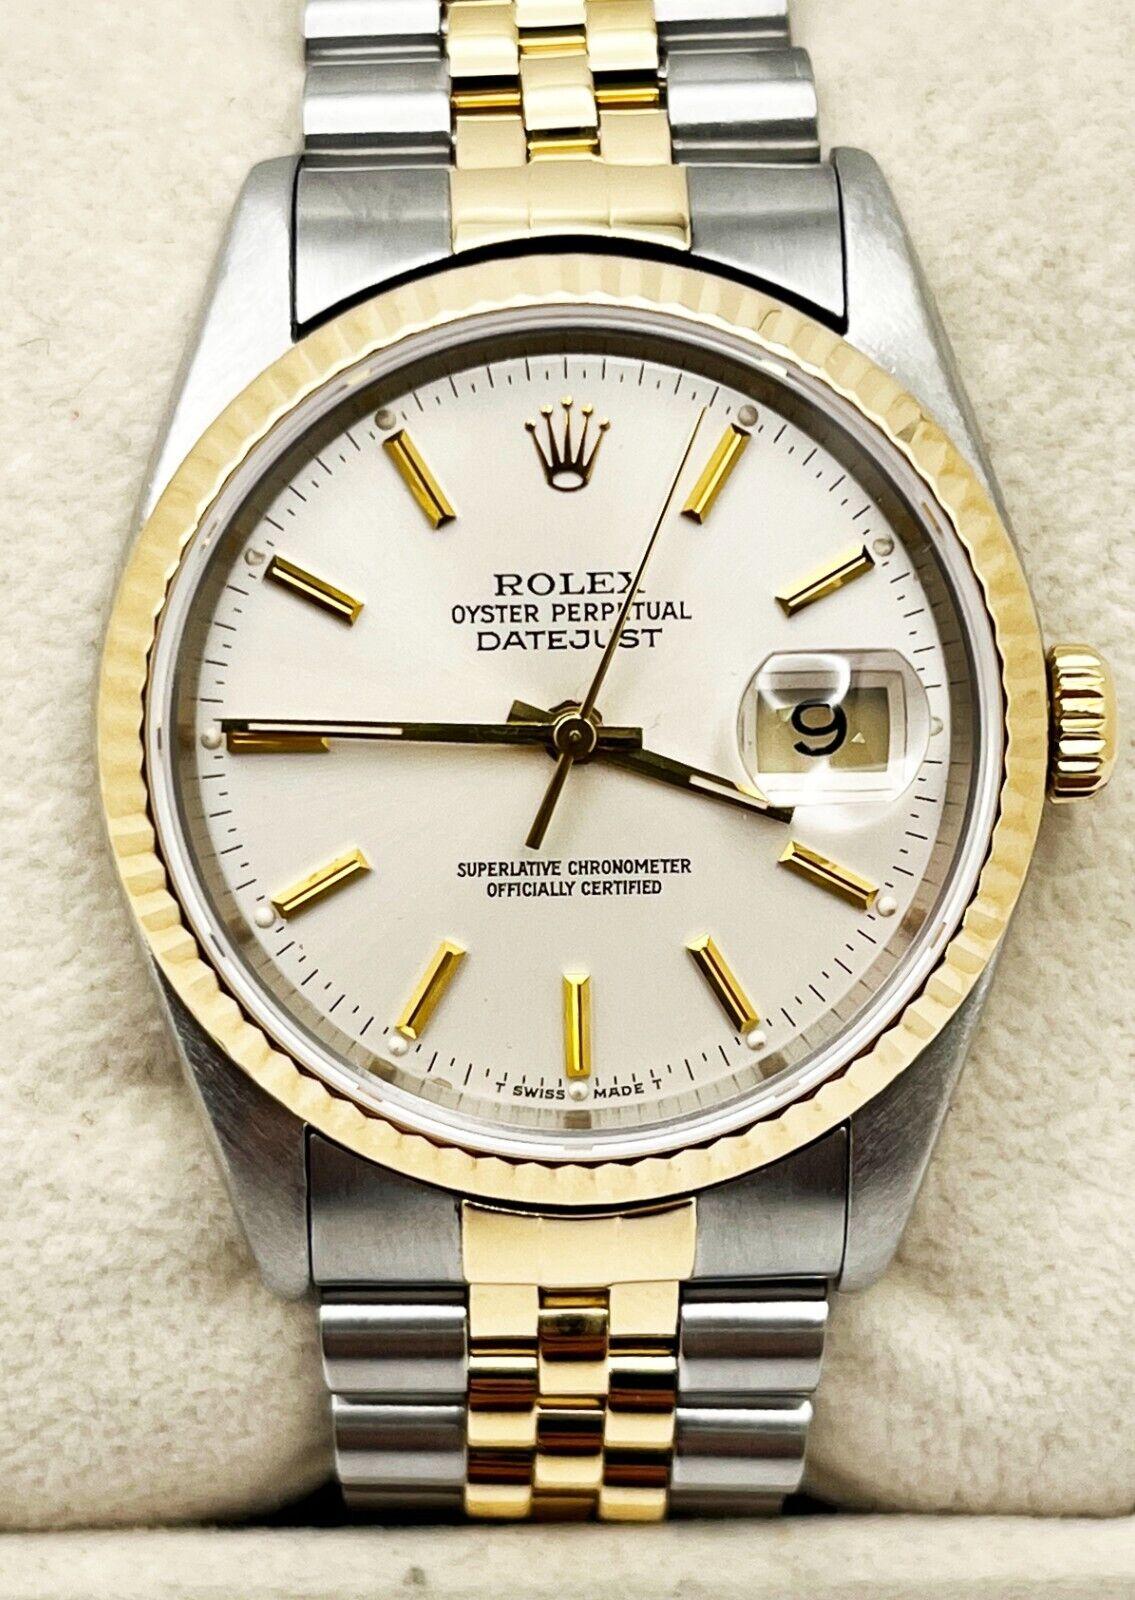 Rolex 16233 Datejust Silver Dial 18K Gold and Stainless Steel In Good Condition For Sale In San Diego, CA